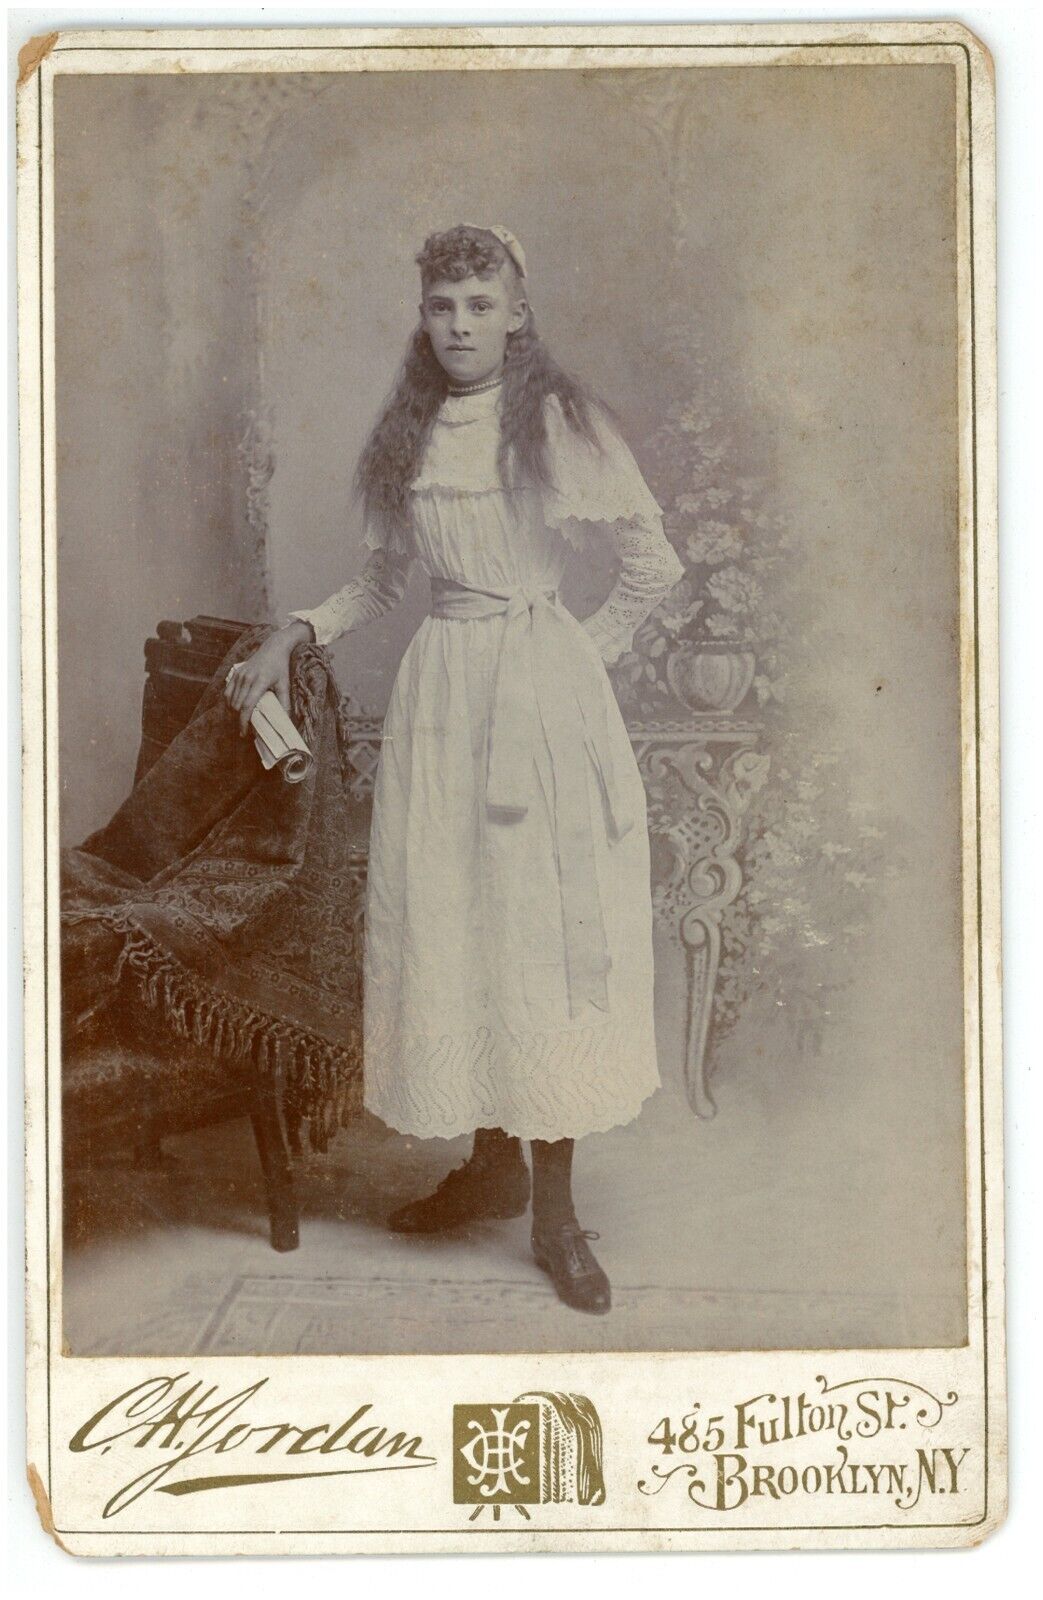 Antique c1880s Cabinet Card Jordan Beautiful Young Girl in Dress Brooklyn, NY